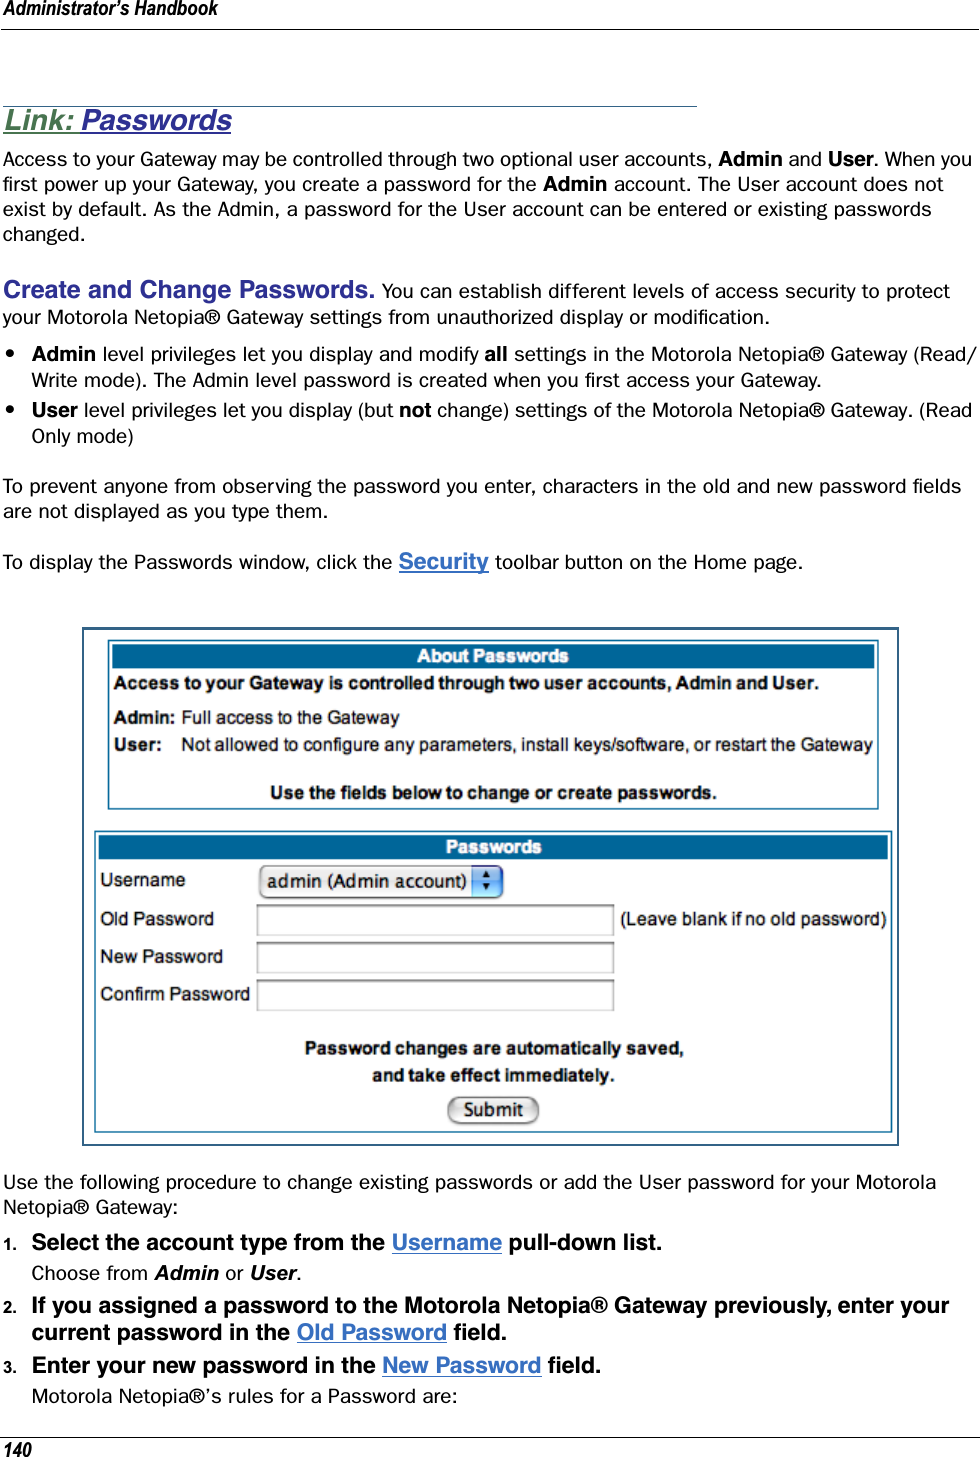 Administrator’s Handbook140Link: PasswordsAccess to your Gateway may be controlled through two optional user accounts, Admin and User. When you ﬁrst power up your Gateway, you create a password for the Admin account. The User account does not exist by default. As the Admin, a password for the User account can be entered or existing passwords changed.Create and Change Passwords. You can establish different levels of access security to protect your Motorola Netopia® Gateway settings from unauthorized display or modiﬁcation.•Admin level privileges let you display and modify all settings in the Motorola Netopia® Gateway (Read/Write mode). The Admin level password is created when you ﬁrst access your Gateway.•User level privileges let you display (but not change) settings of the Motorola Netopia® Gateway. (Read Only mode)To prevent anyone from observing the password you enter, characters in the old and new password ﬁelds are not displayed as you type them. To display the Passwords window, click the Security toolbar button on the Home page.Use the following procedure to change existing passwords or add the User password for your Motorola Netopia® Gateway:1. Select the account type from the Username pull-down list.Choose from Admin or User.2. If you assigned a password to the Motorola Netopia® Gateway previously, enter your current password in the Old Password ﬁeld.3. Enter your new password in the New Password ﬁeld.Motorola Netopia®’s rules for a Password are: